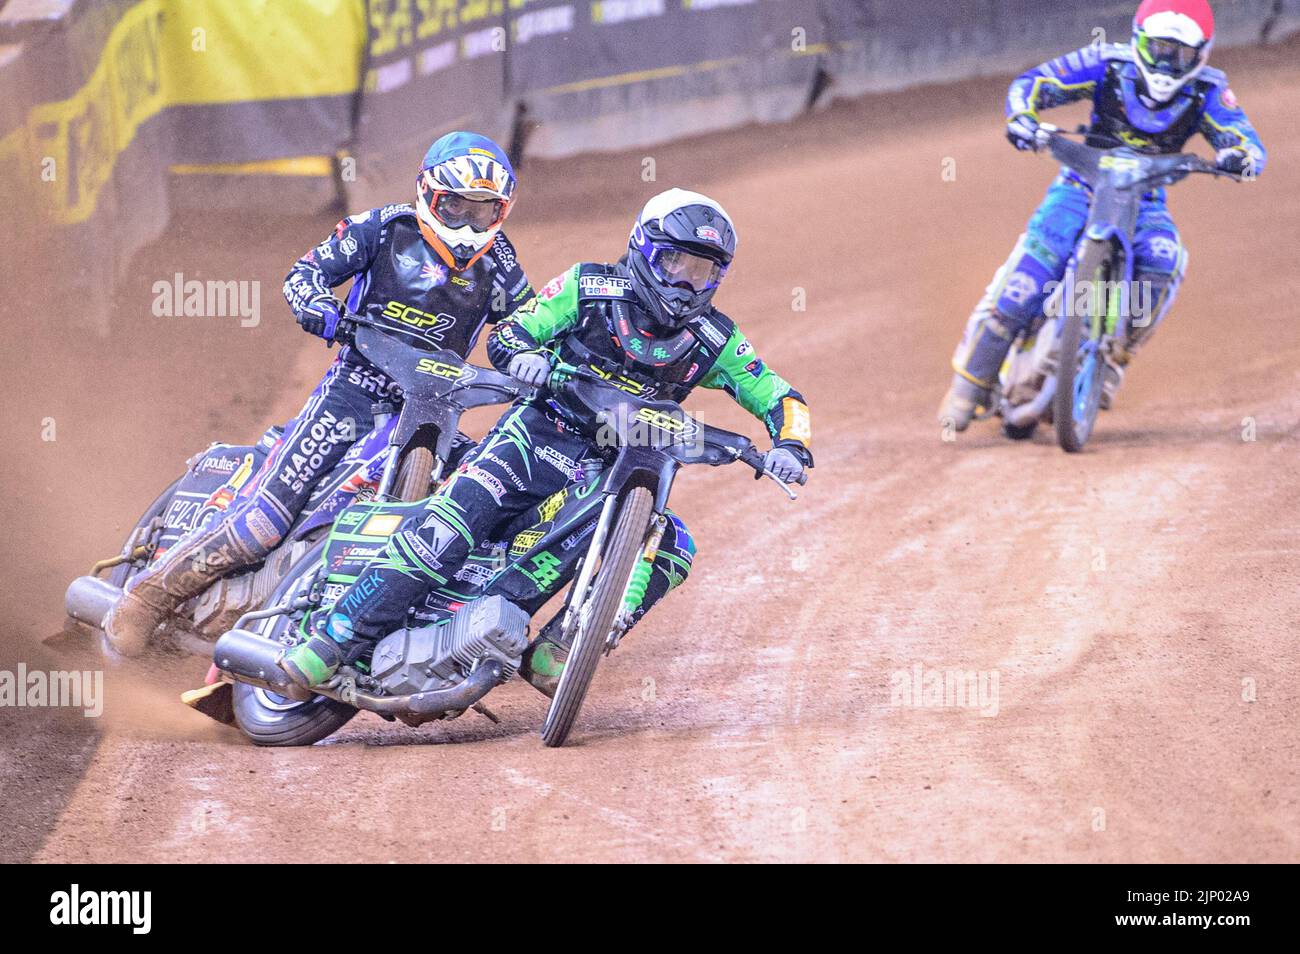 Benjamin Basso (Denmark) leads Jason Edwards (Great Britain) with Petr Chlupac (Czech Republic) (Red) behind during the FIM Speedway Grand Prix 2 of Great Britain at the Principality Stadium, Cardiff on Sunday 14th August 2022. (Credit: Ian Charles | MI News) Credit: MI News & Sport /Alamy Live News Stock Photo